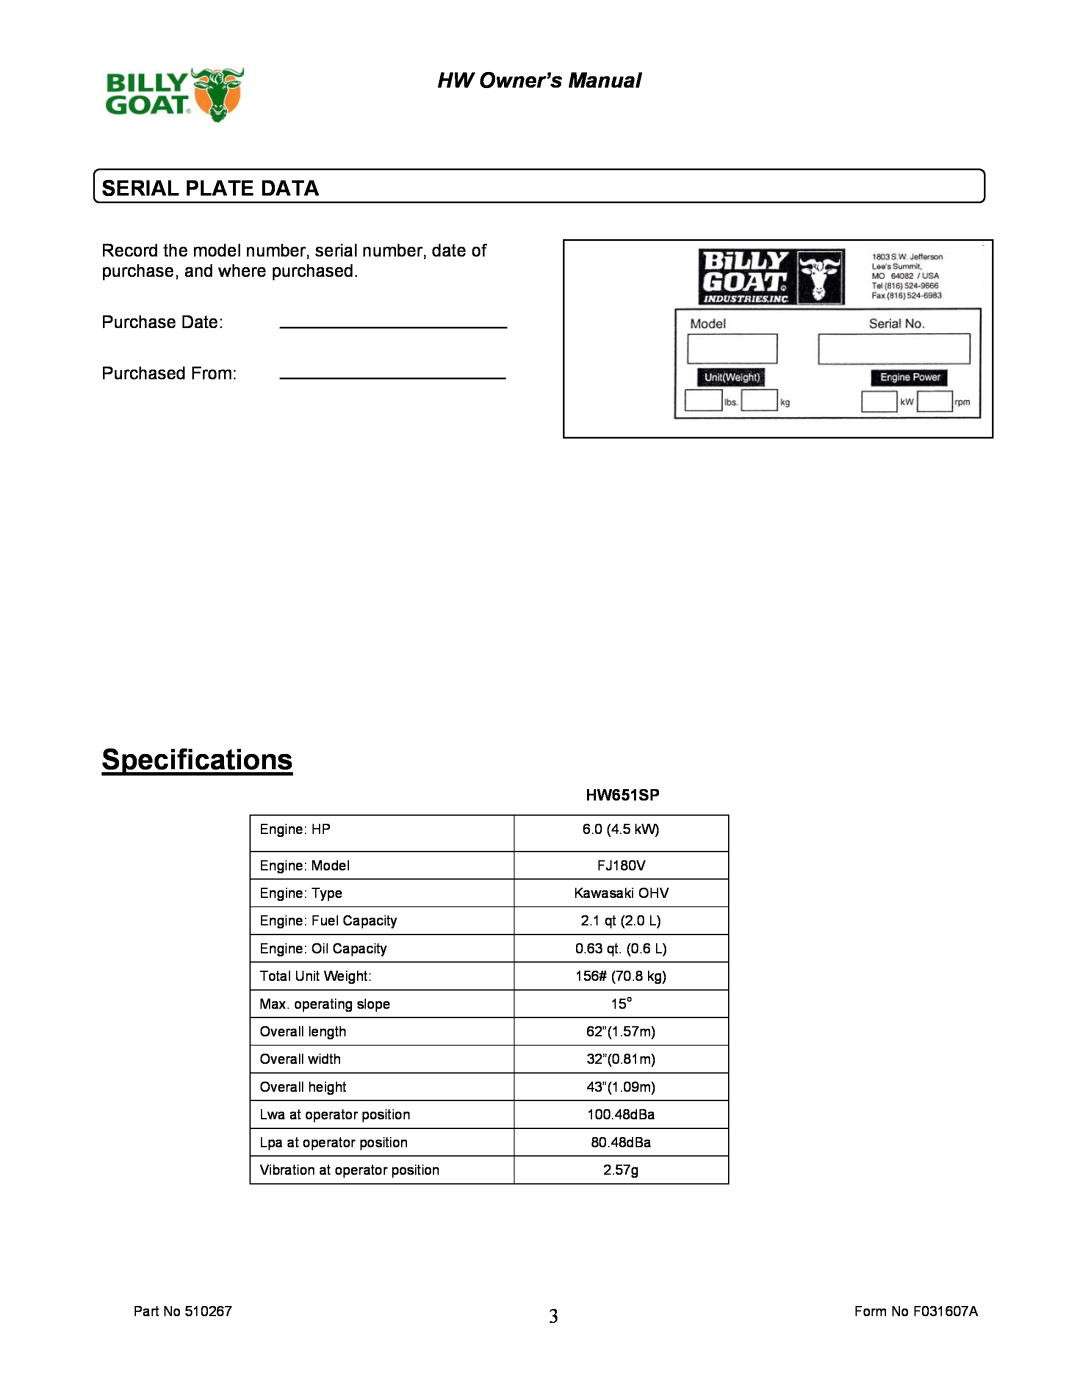 Billy Goat HW651SP owner manual Serial Plate Data, Specifications 